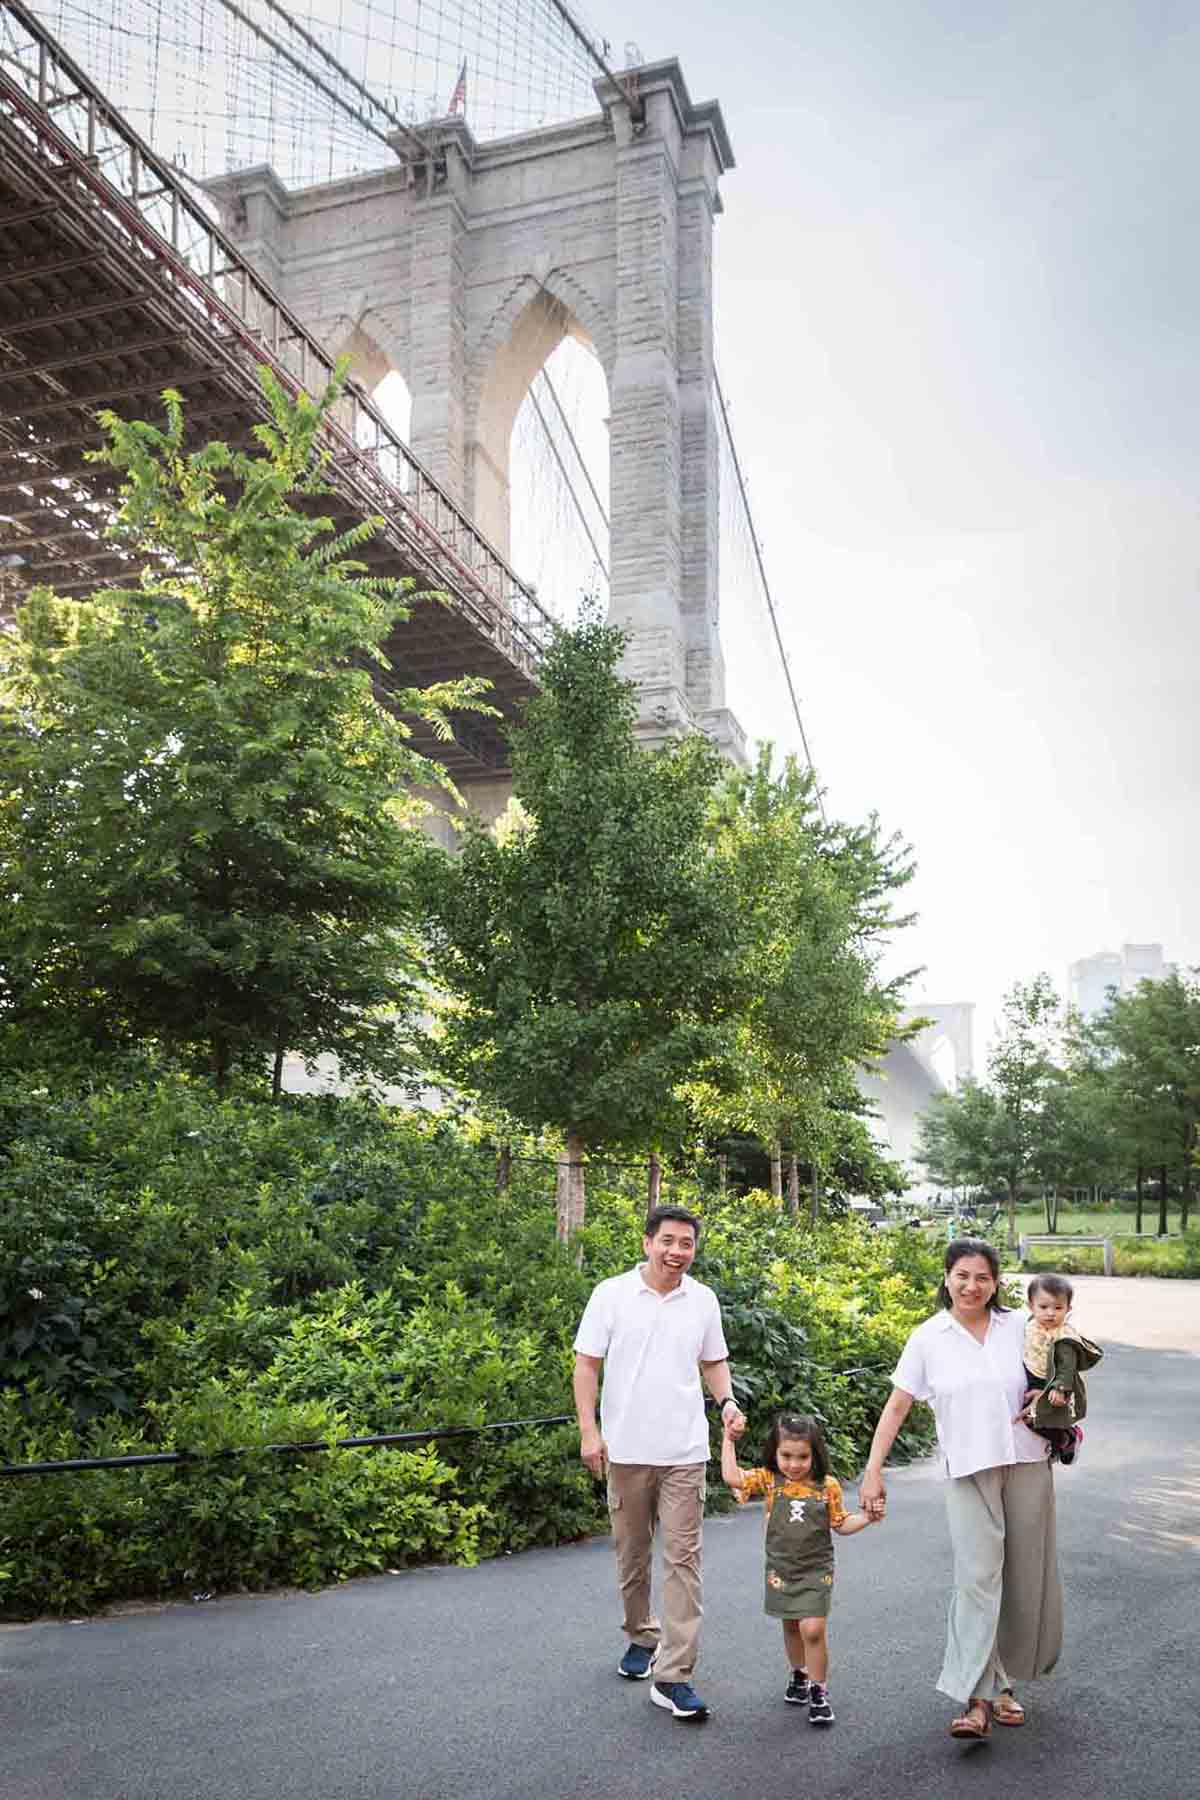 Parents walking with two daughters in front of Brooklyn Bridge for an article on Brooklyn Bridge Park family portrait tips for young children